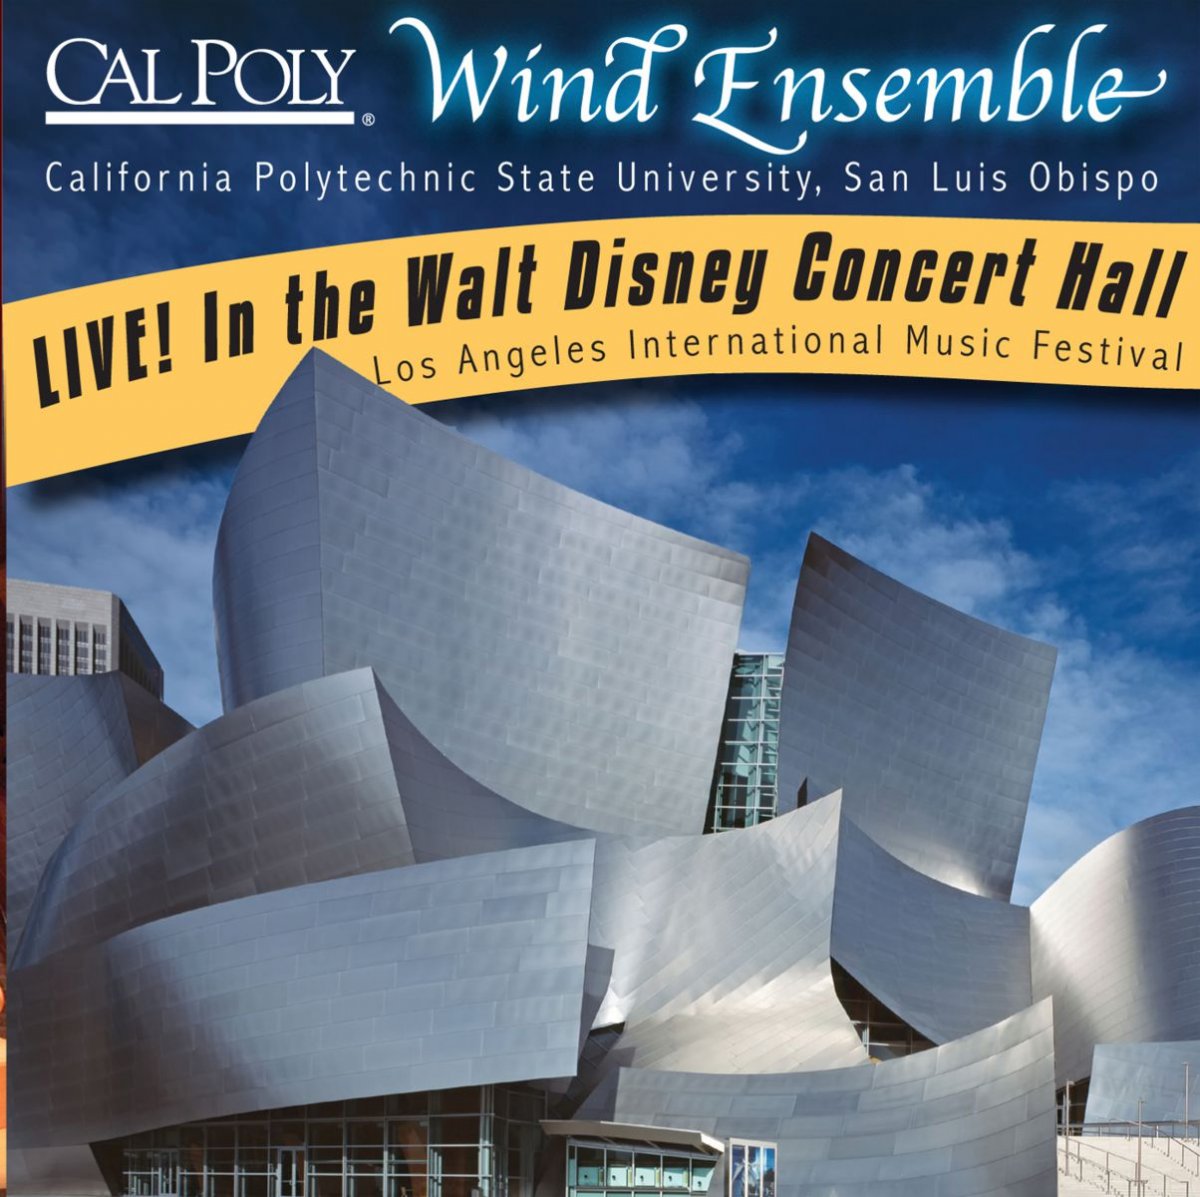 California Polytechnic State University Wind Ensemble Live! In the Walt Disney Concert Hall - clicca qui